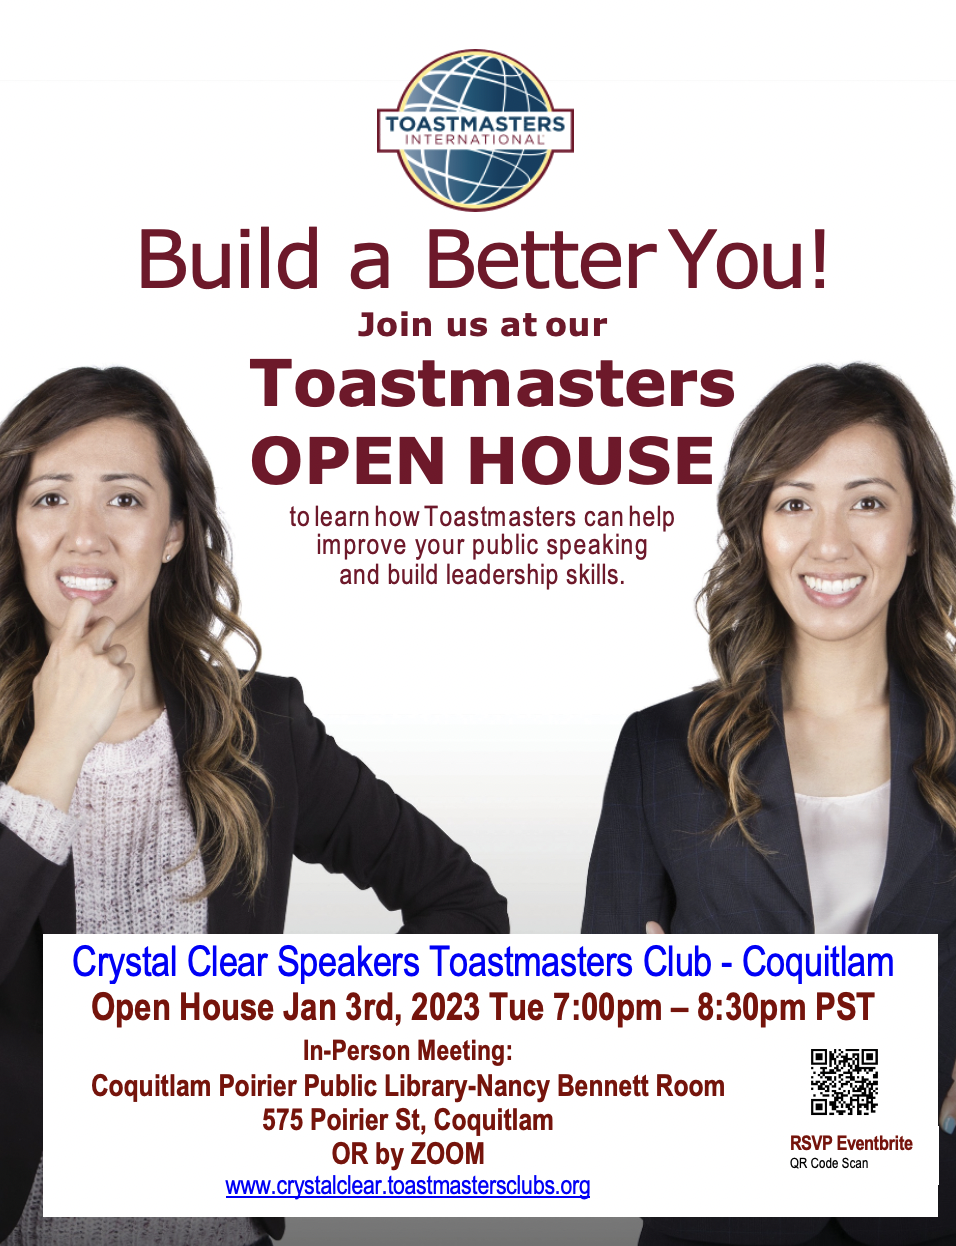 Toastmasters Open House Jan 3rd, 2023 @7pm PST